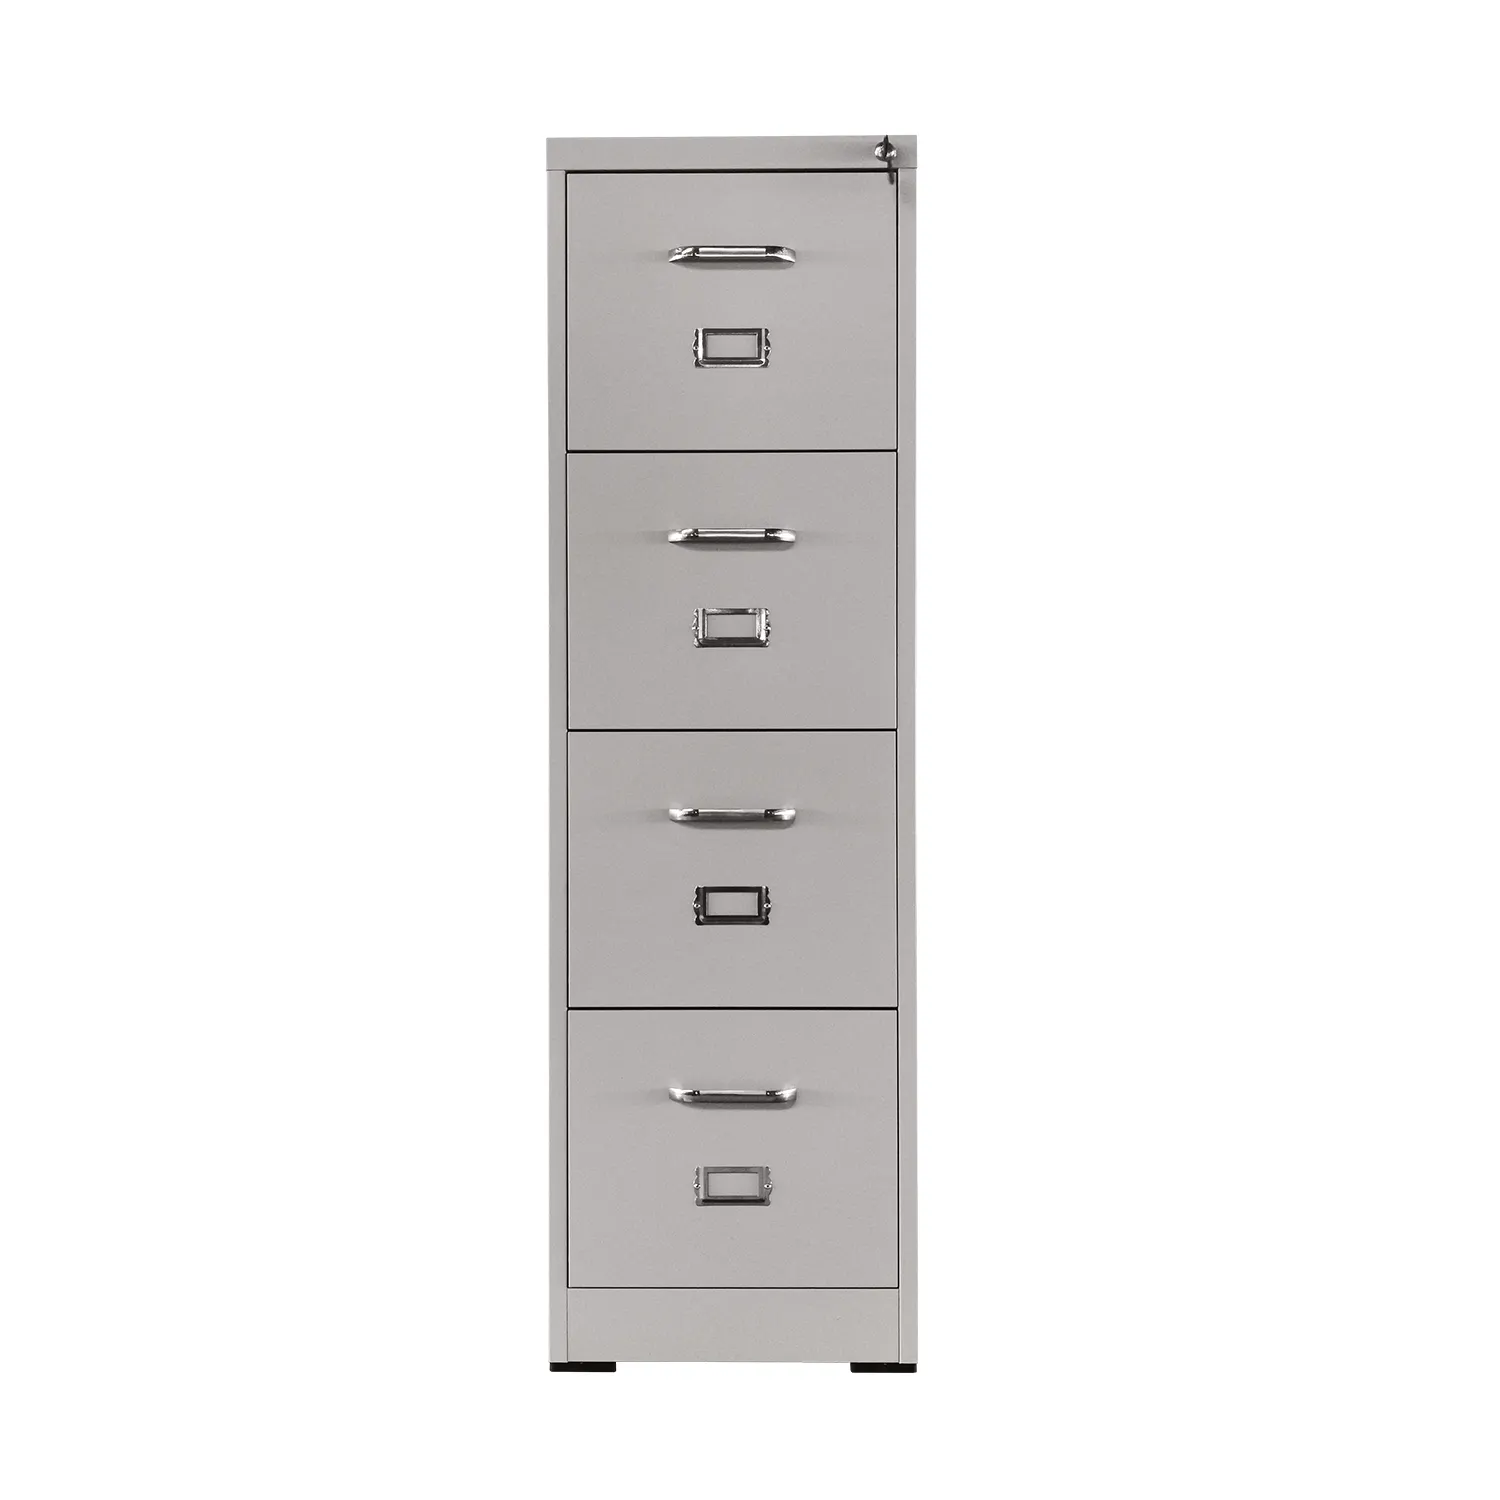 GD Office Steel File Cabinet Invite Tenders Drawer Cabinet Hot Selling Knock Down Steel Filing Cabinet With 4 Drawers